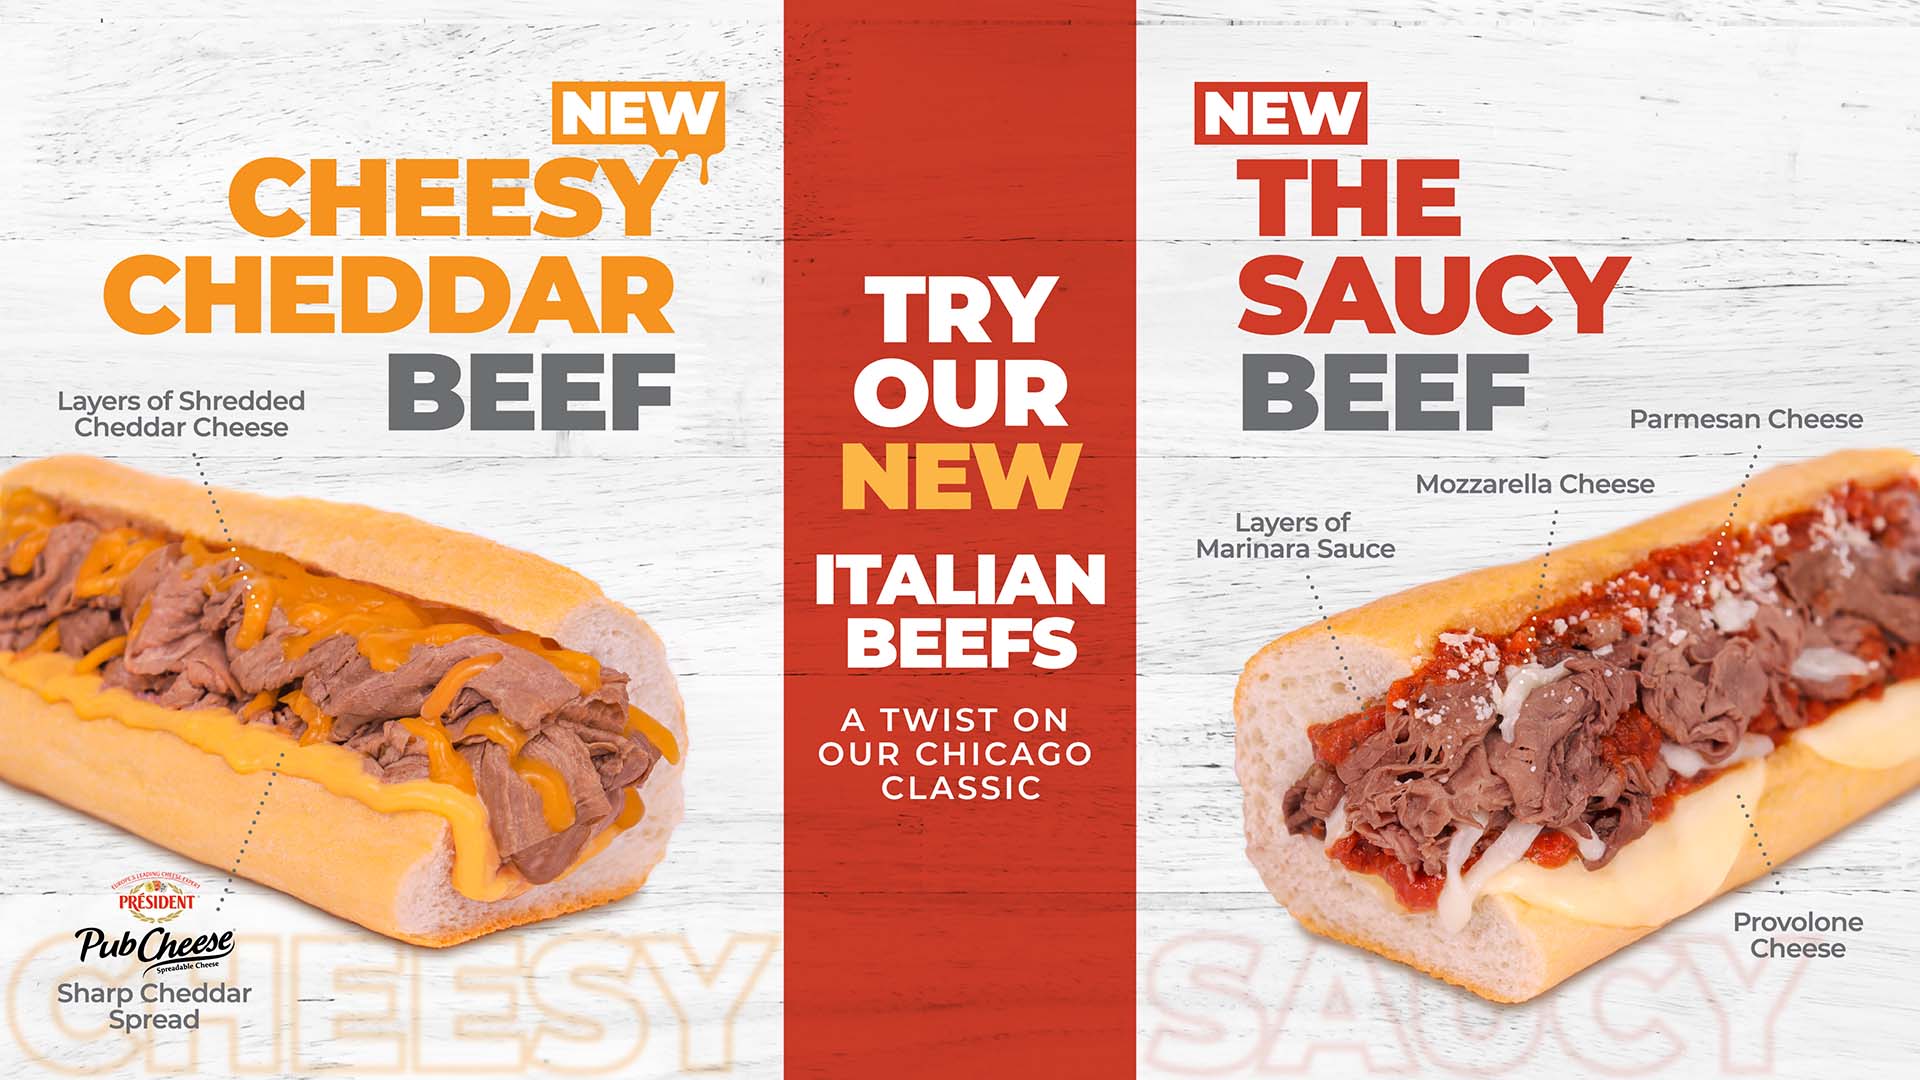 buona beef advert for new cheddar and saucy beef